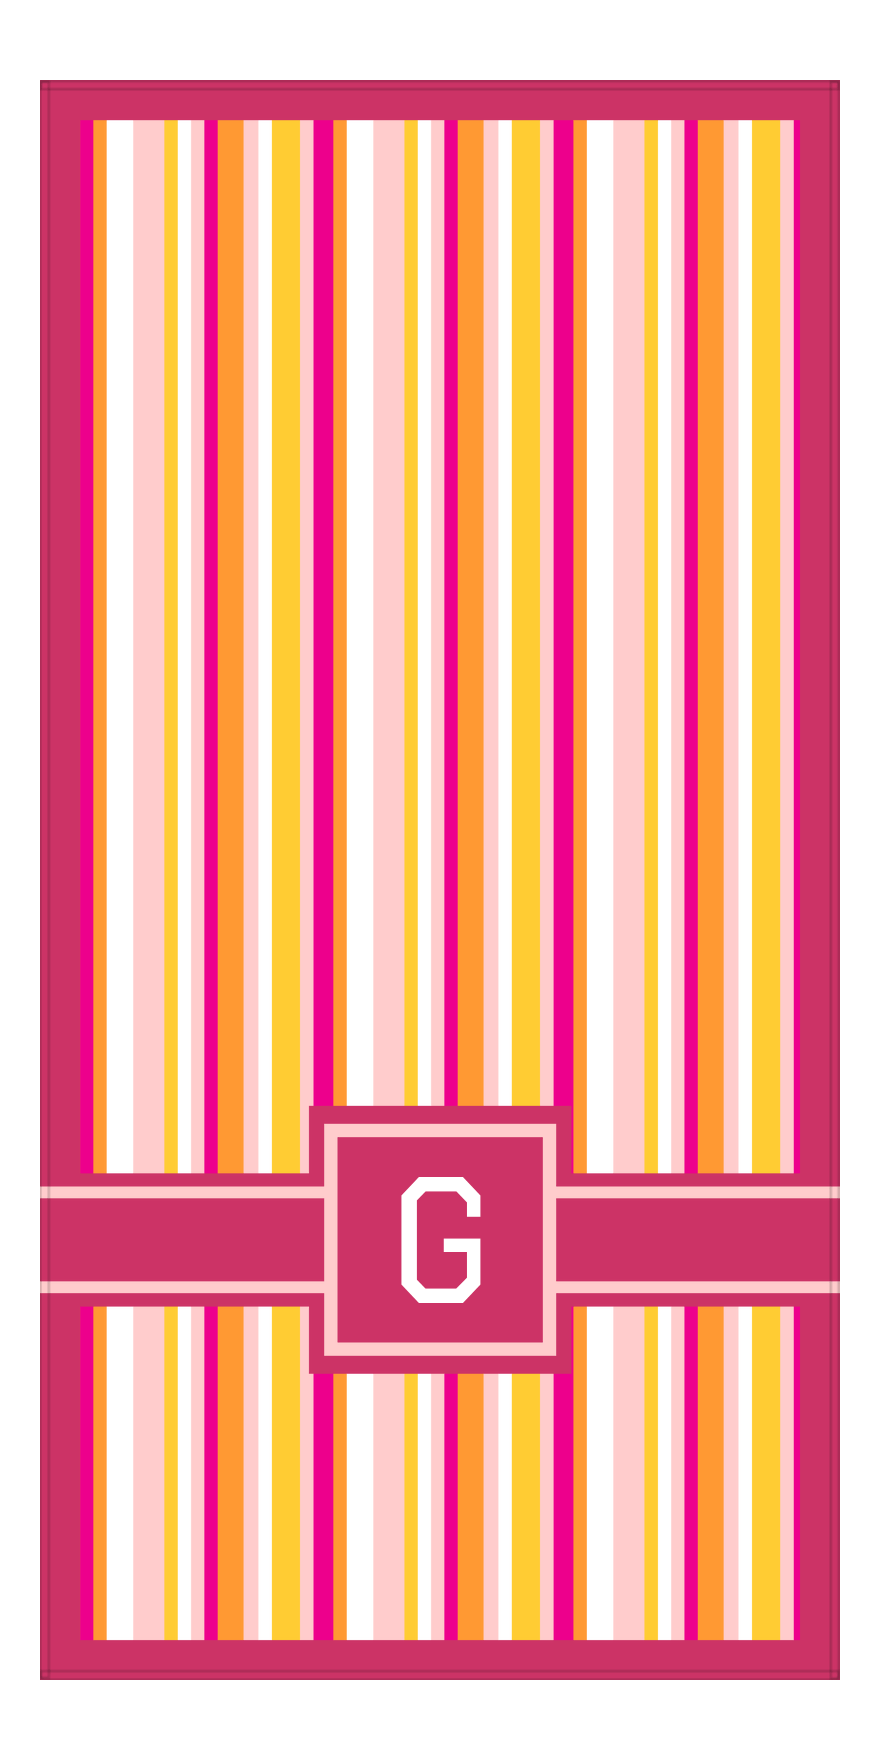 Personalized 5 Color Stripes 3 Repeat Beach Towel - Vertical - Pink and Orange - Square with Ribbon Off Center Frame - Front View